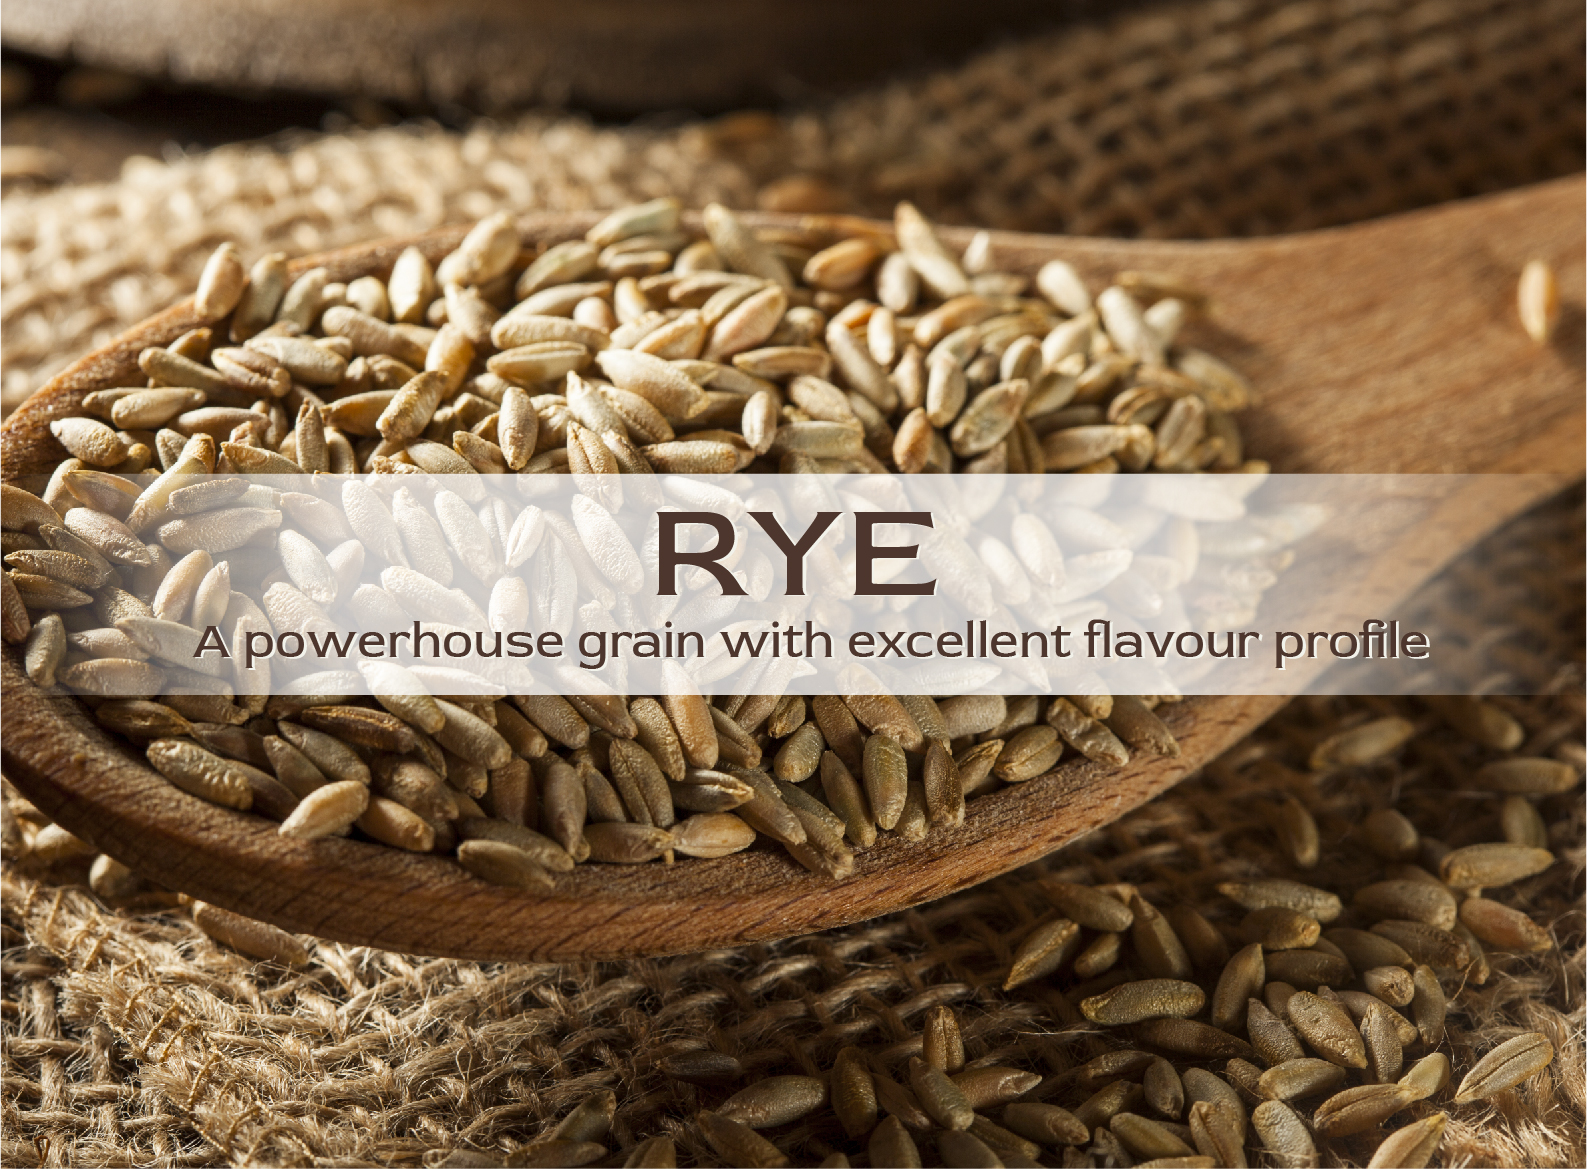 Rye : A powerhouse grain with excellent flavour profile